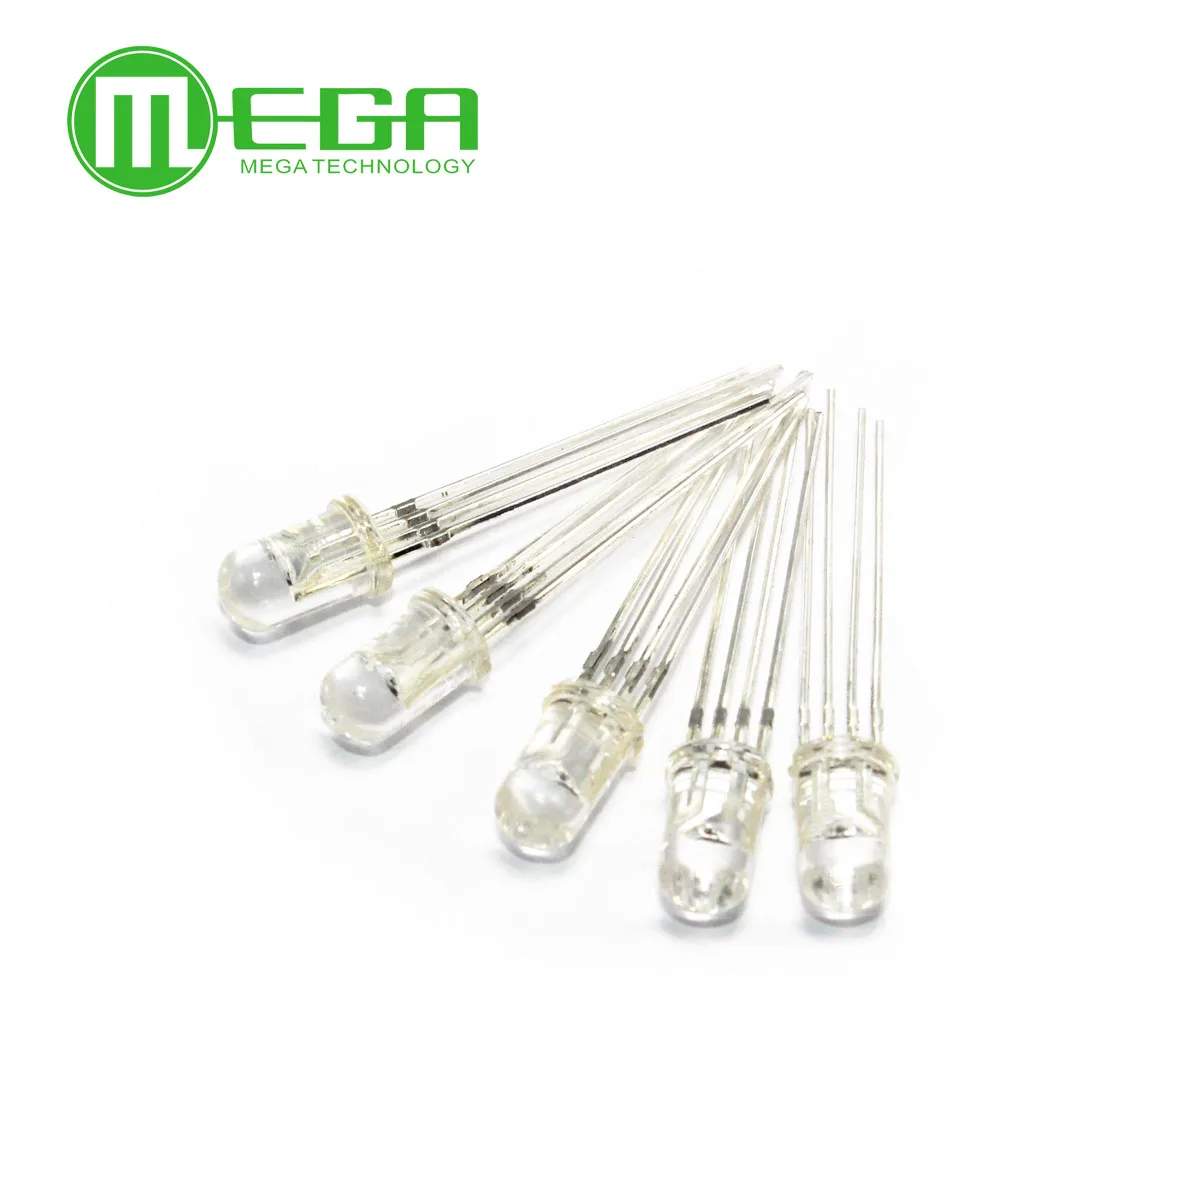 

1000pcs Multicolor 4pin 5mm RGB Led Diode Light Lamp Tricolor Round Common cathode LED 5 mm Light Emitting Diode